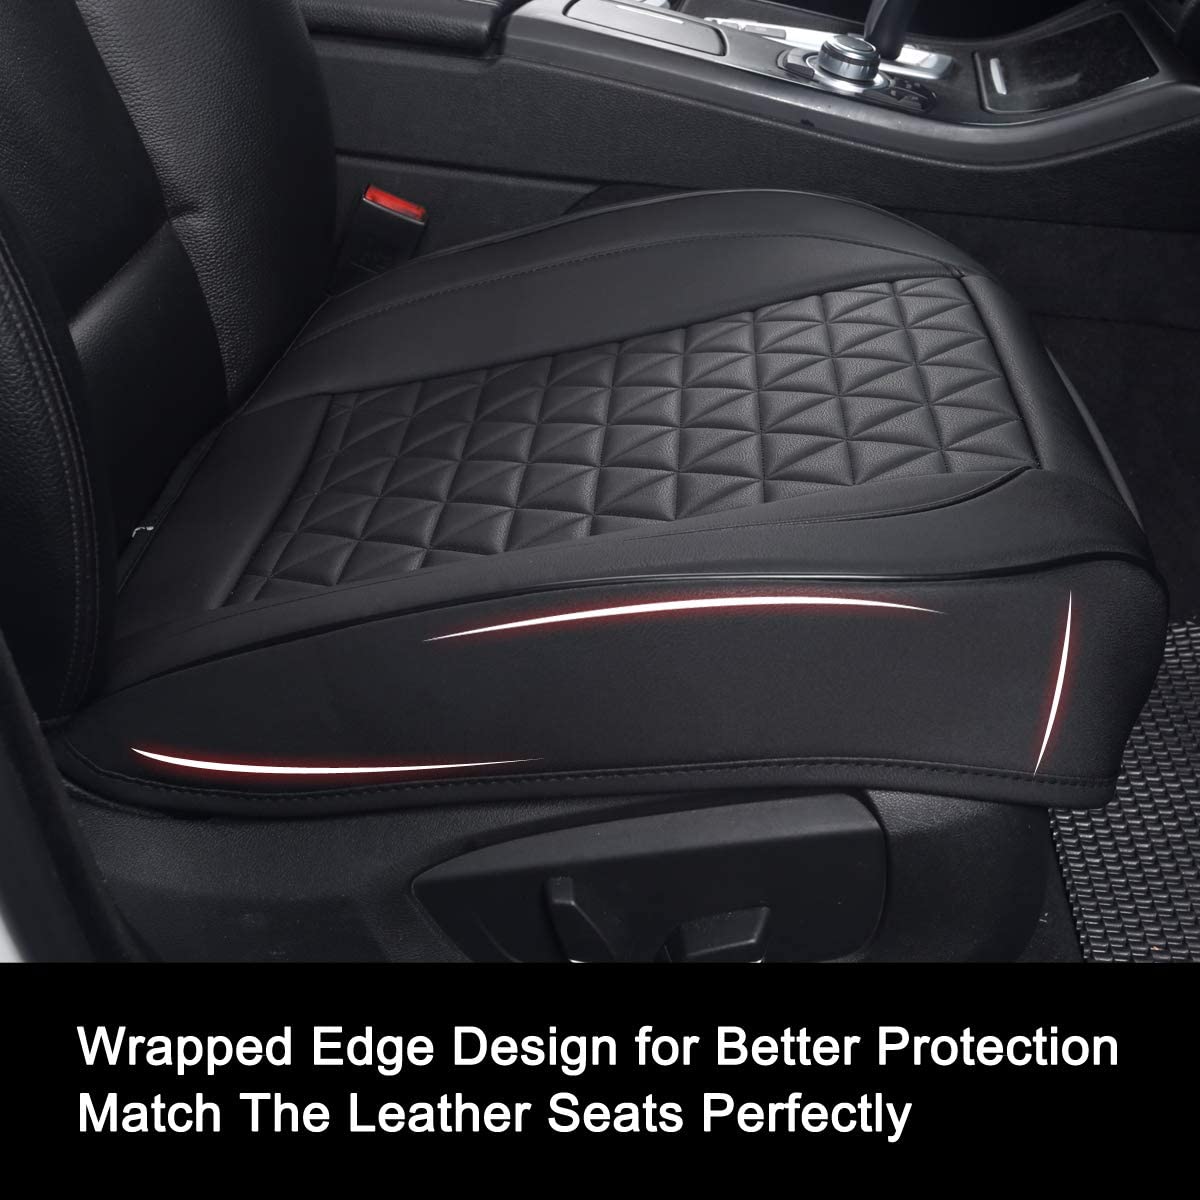 1 Pair Luxury Faux Leather Car Seat Covers Front Bottom Seat Cushions Covers, Anti-Slip and Wrap Around The Bottom, Fit 95% of Vehicles - Black